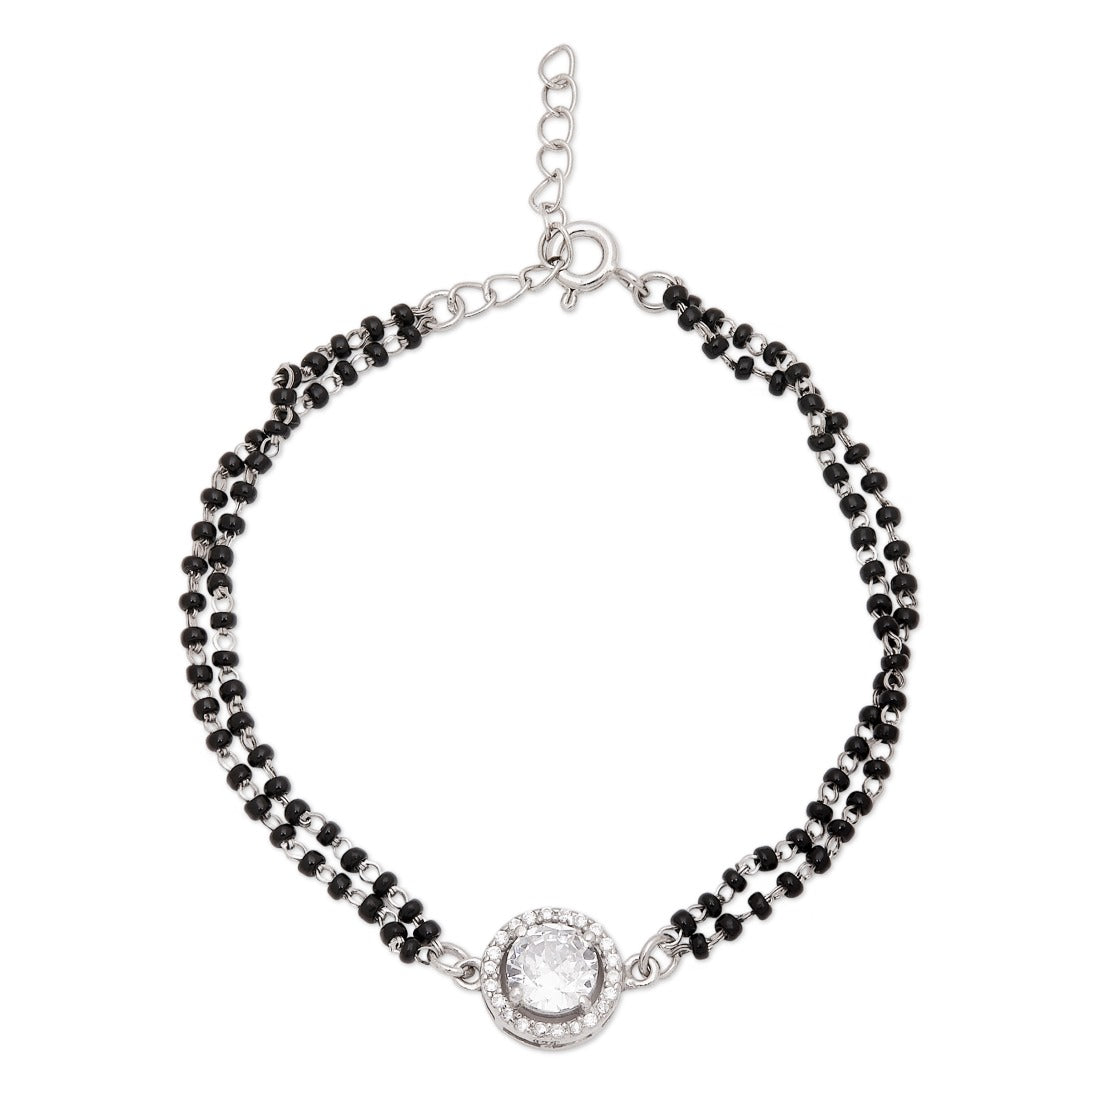 Solitaire Beaded Mangalsutra 925 Sterling Silver Bracelet